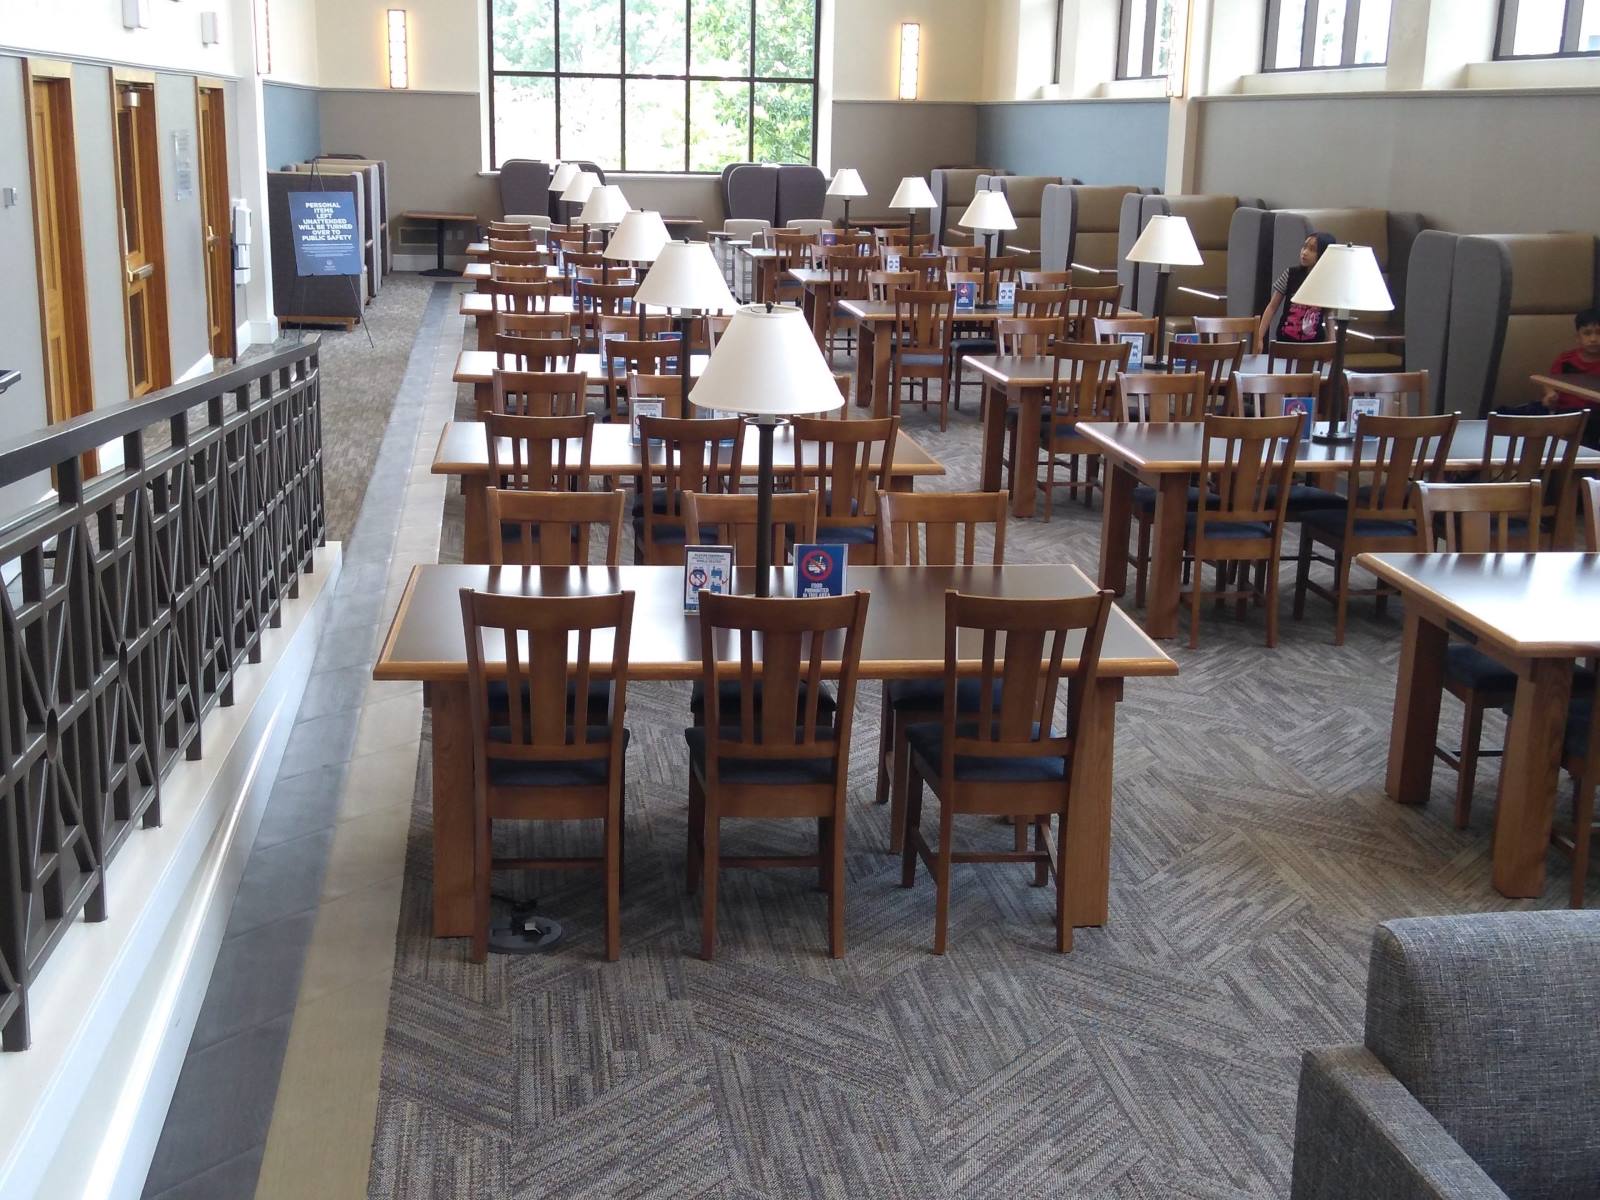 14-fascinating-facts-about-falvey-memorial-library